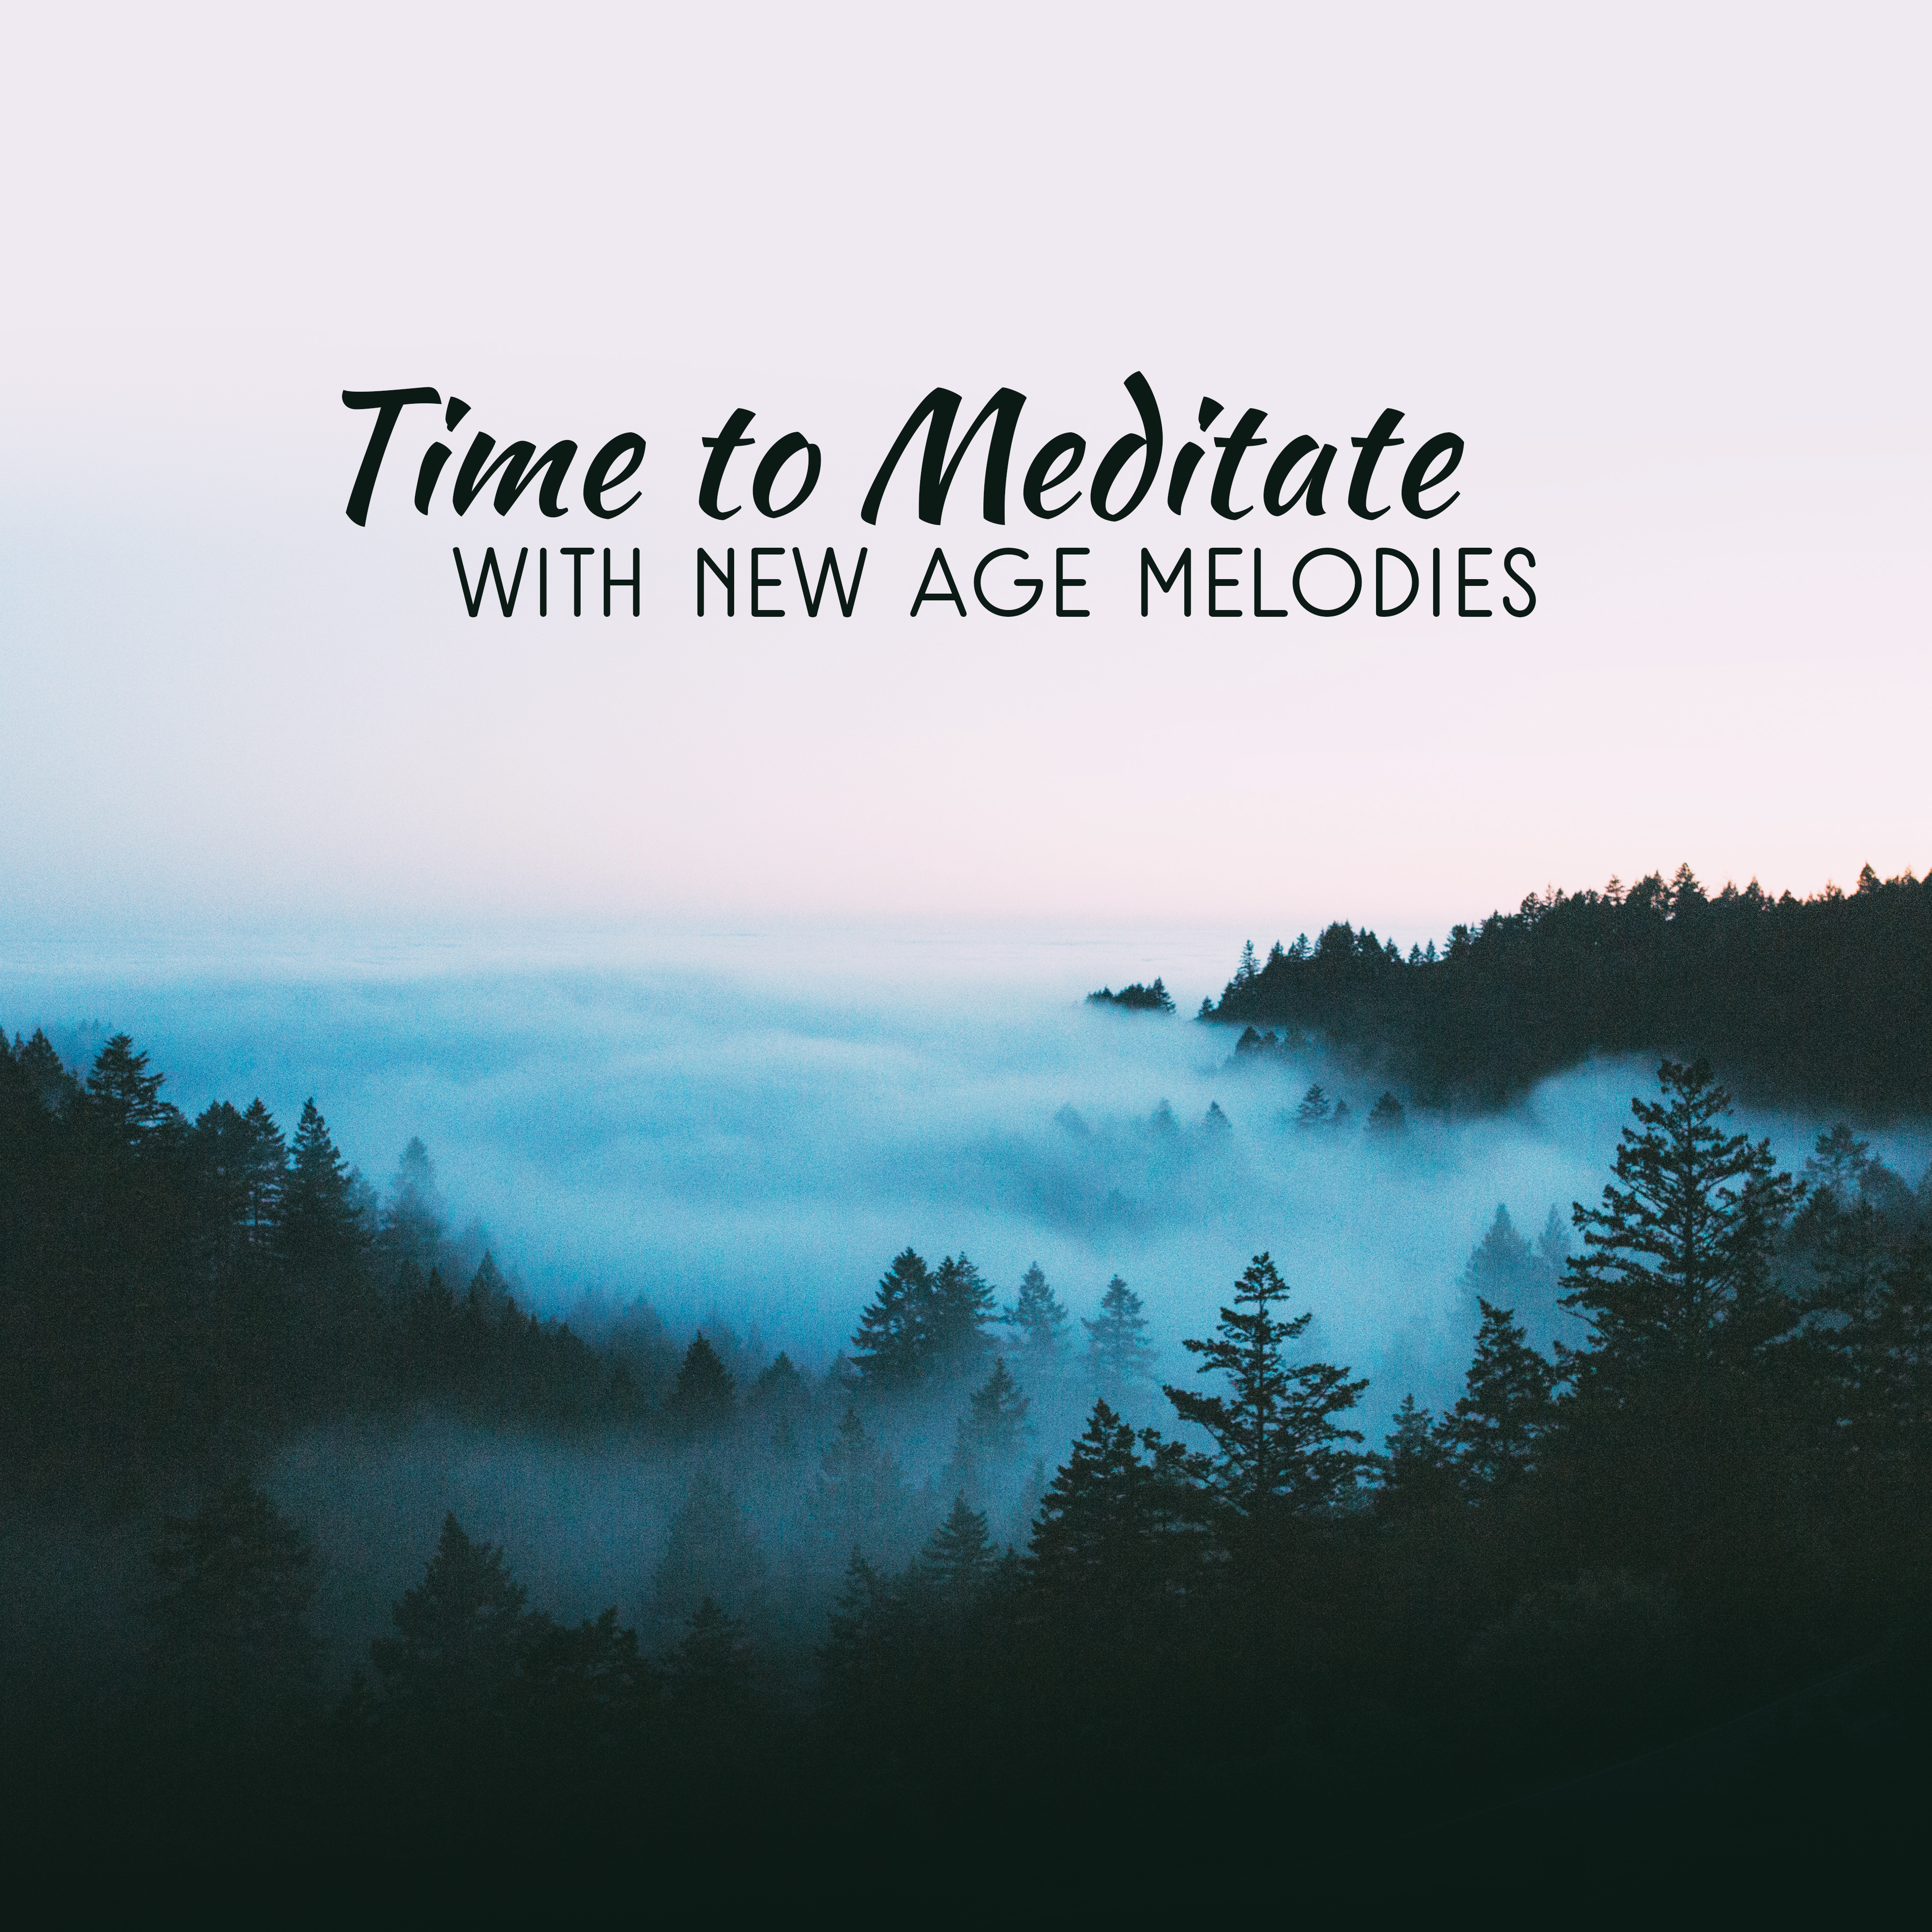 Time to Meditate with New Age Melodies